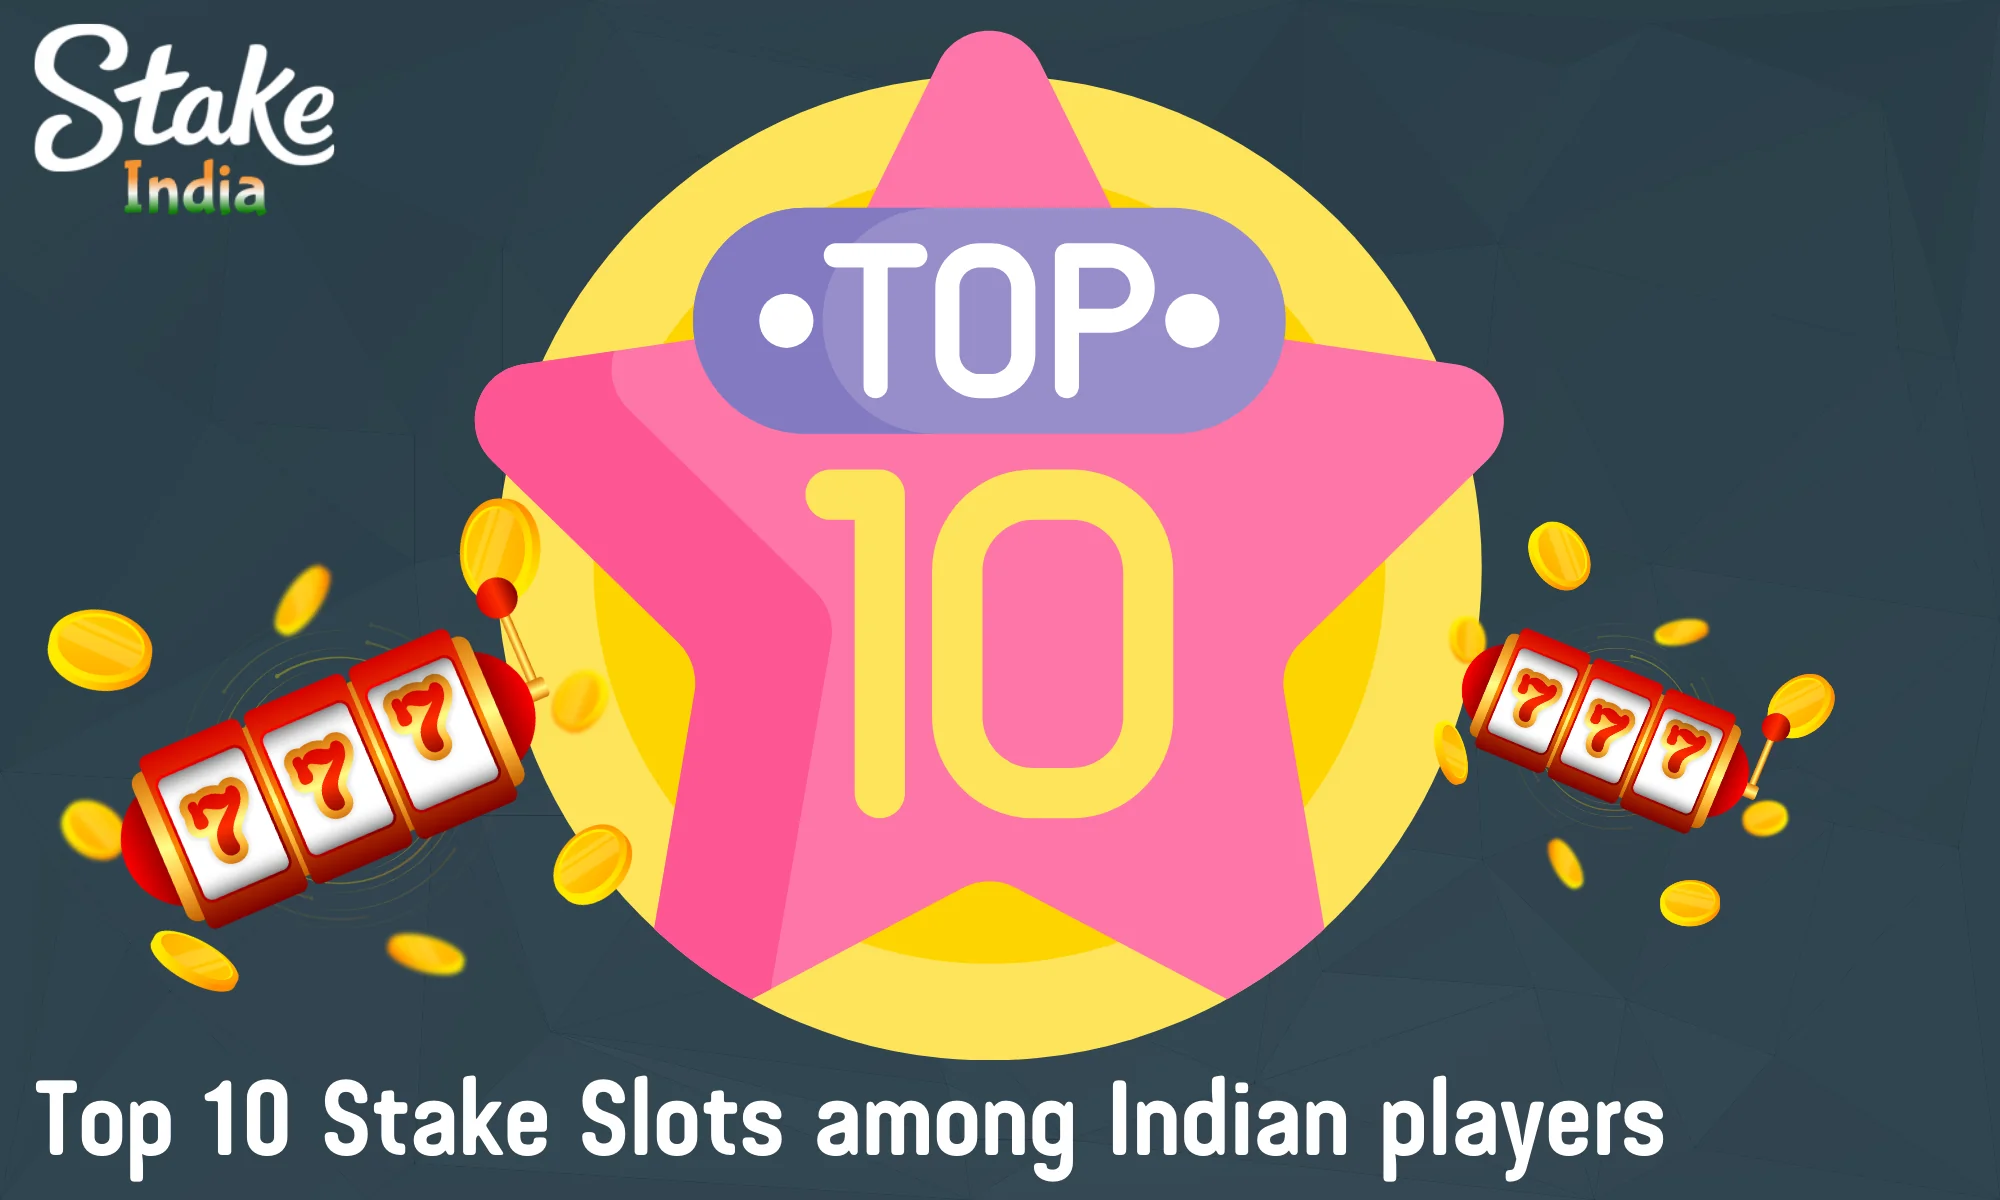 Overview of the Top 10 Most Popular Stake Slots